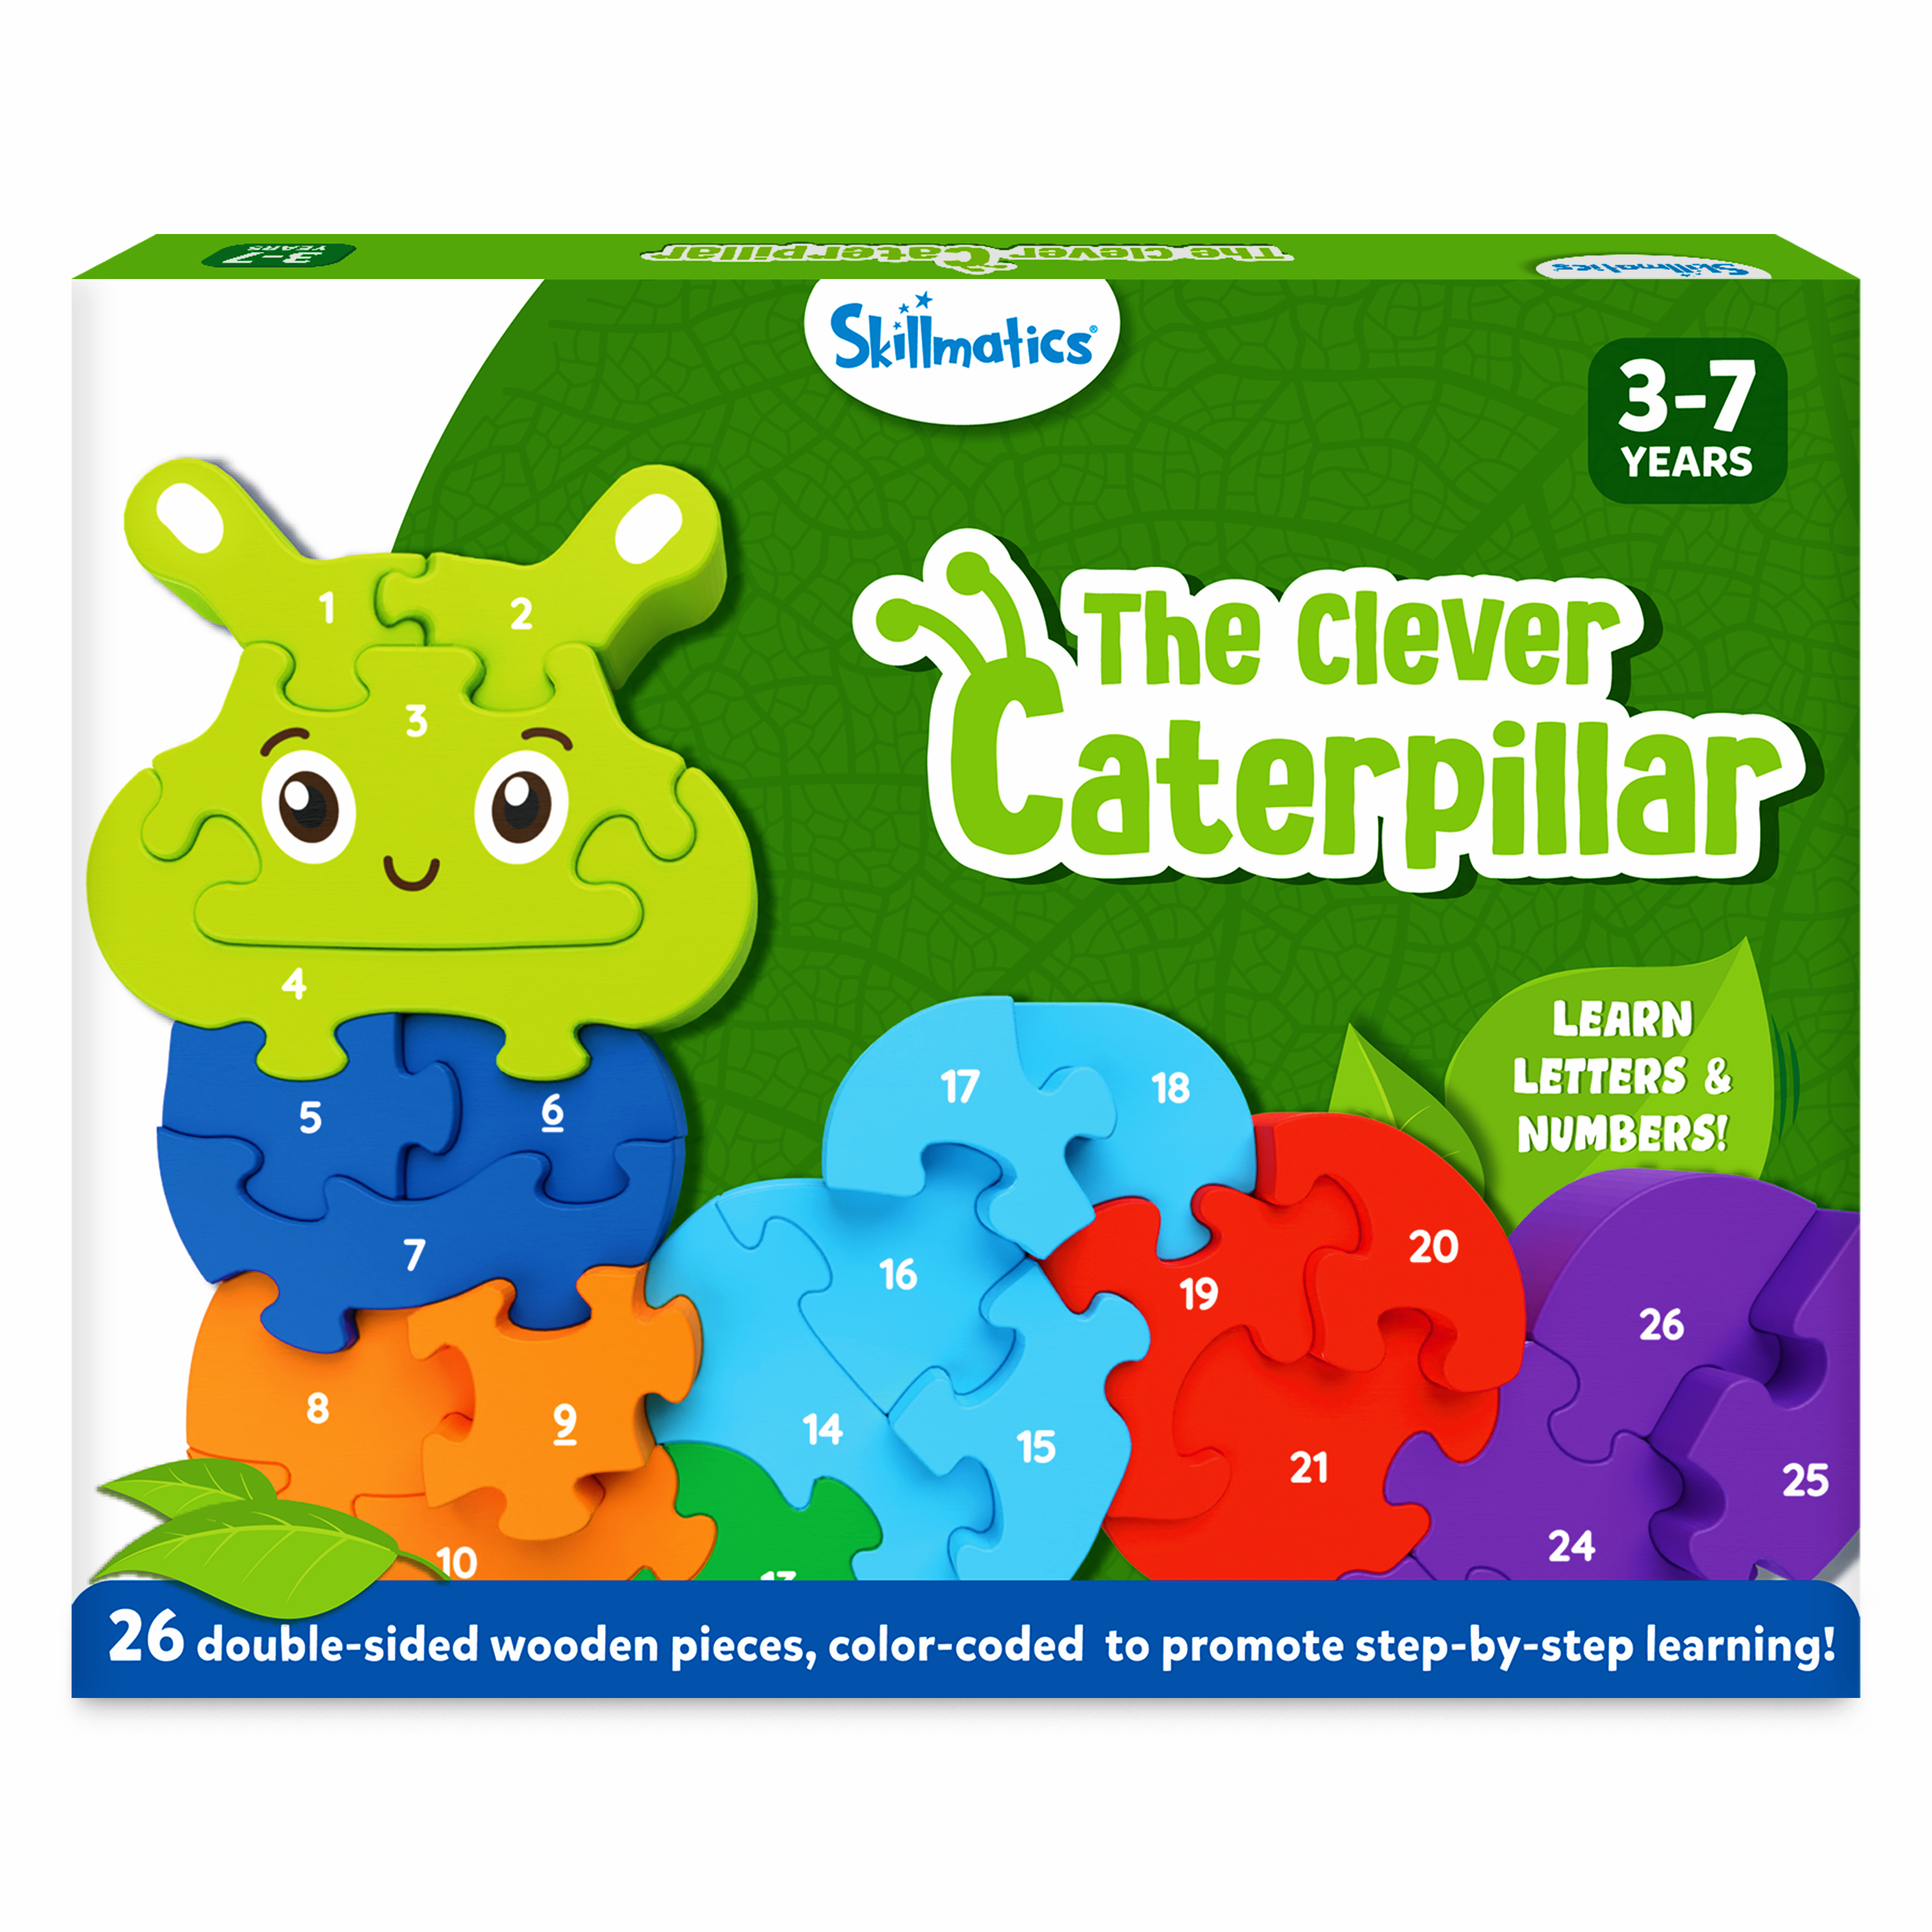 Skillmatics Wooden Puzzle - The Clever Caterpillar, 2 Puzzles in 1, 26 Double-Sided Pieces, Learn Letters & Numbers, Gifts for Ages 3 to 7